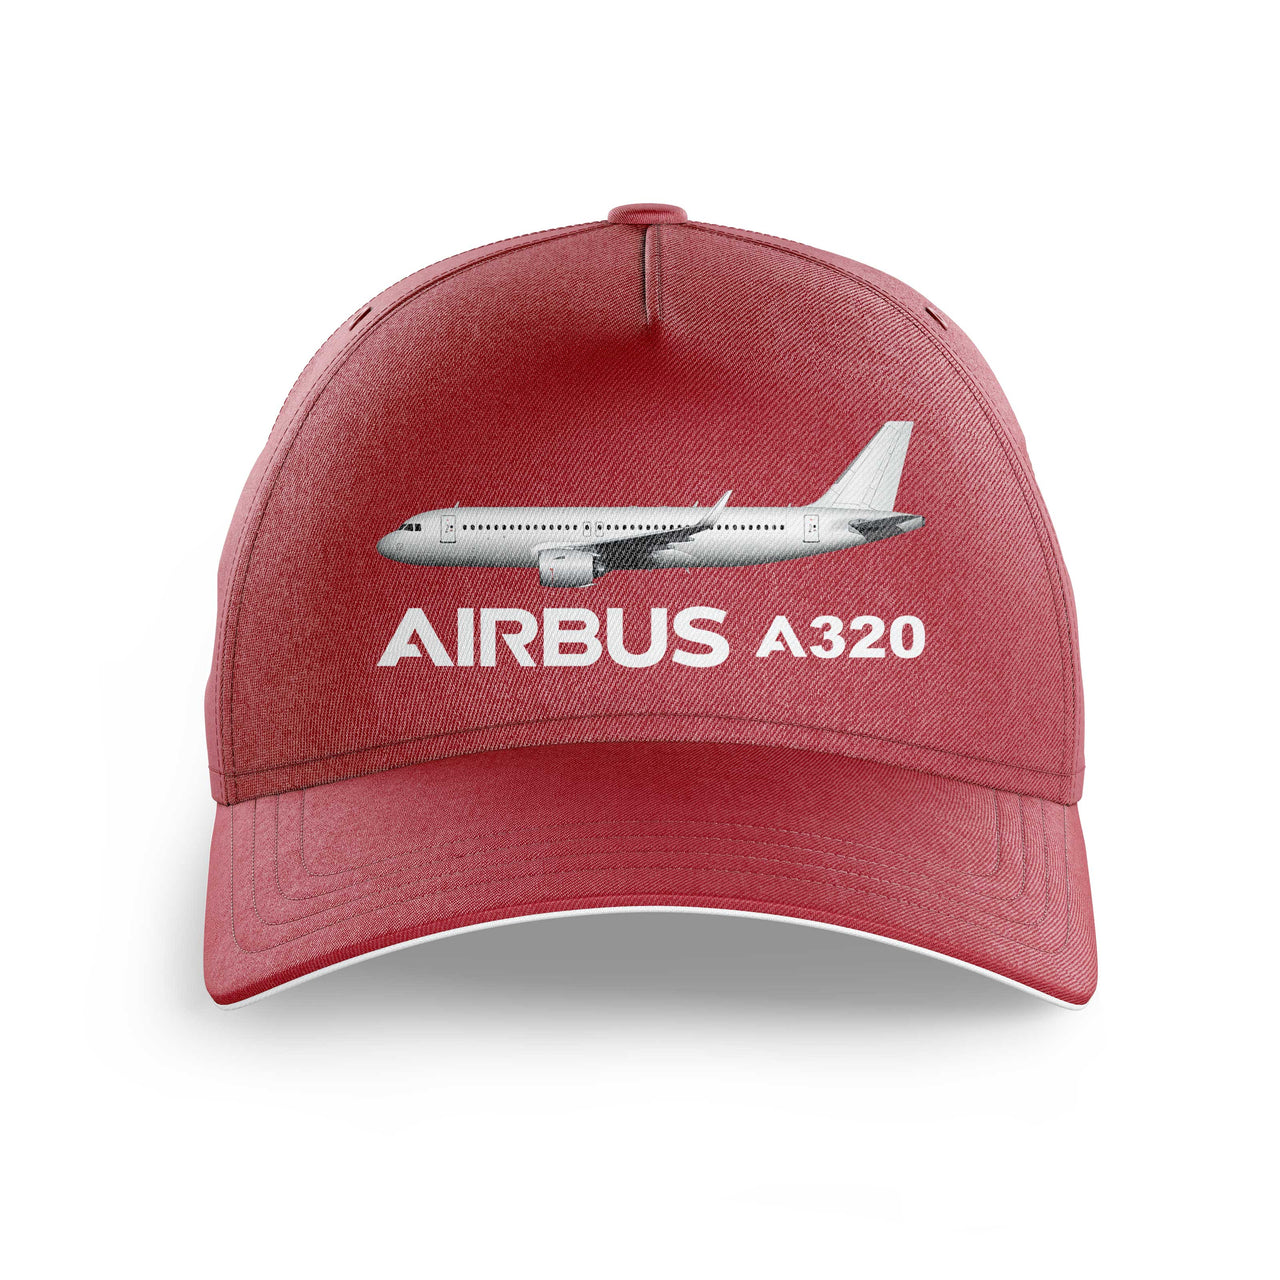 The Airbus A320 Printed Hats